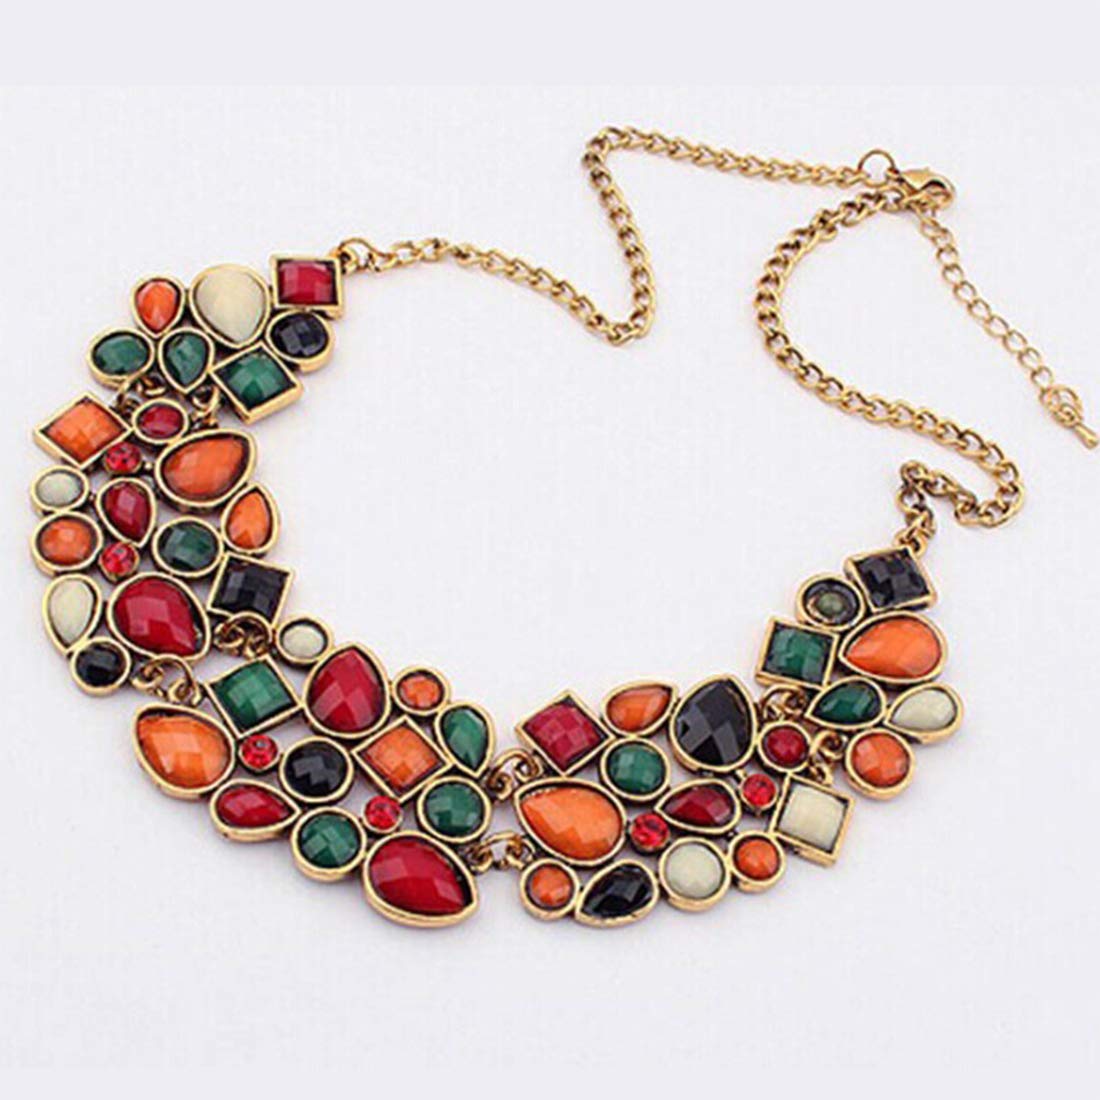 Yellow Chimes Stylish Multicolor Crystal Studded Geometric Mosaic Stones Latest Fashion Chocker Necklace for Women and Girl's